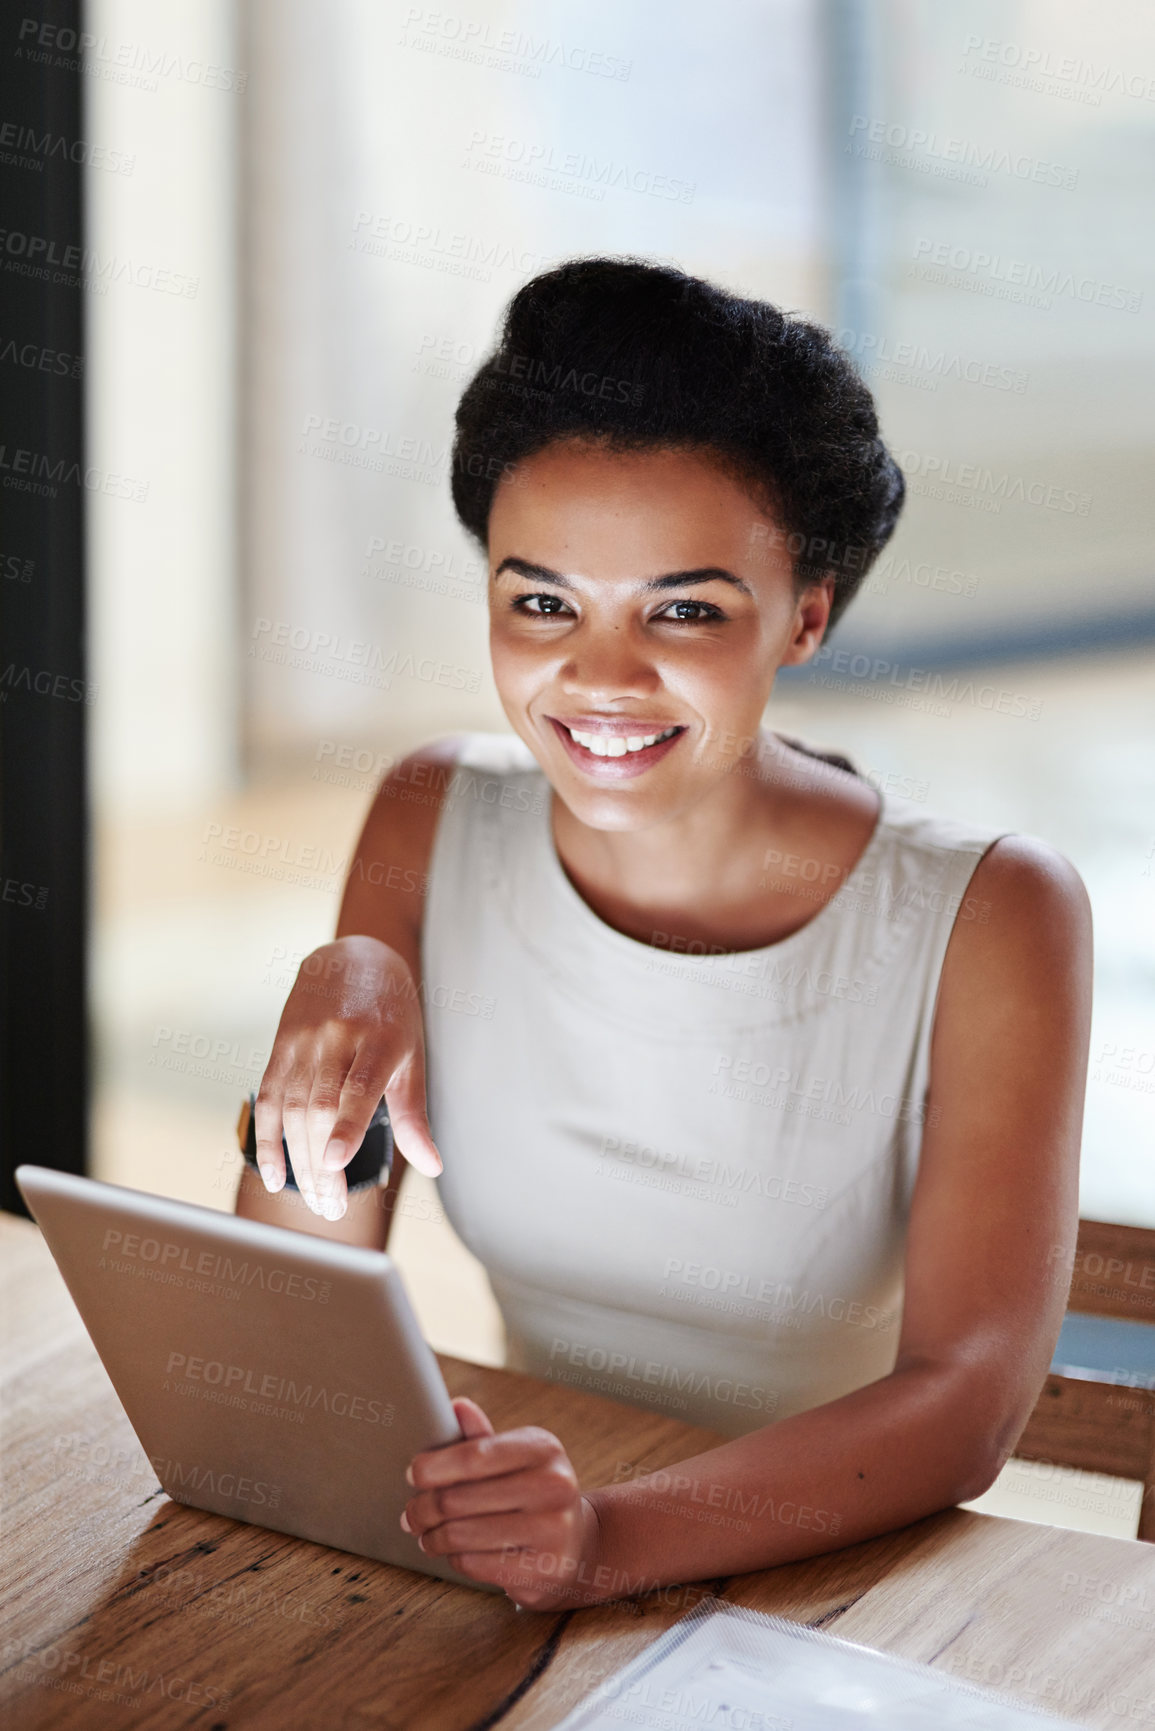 Buy stock photo Portrait of a smiling young businesswoman using a digital tablet in an office